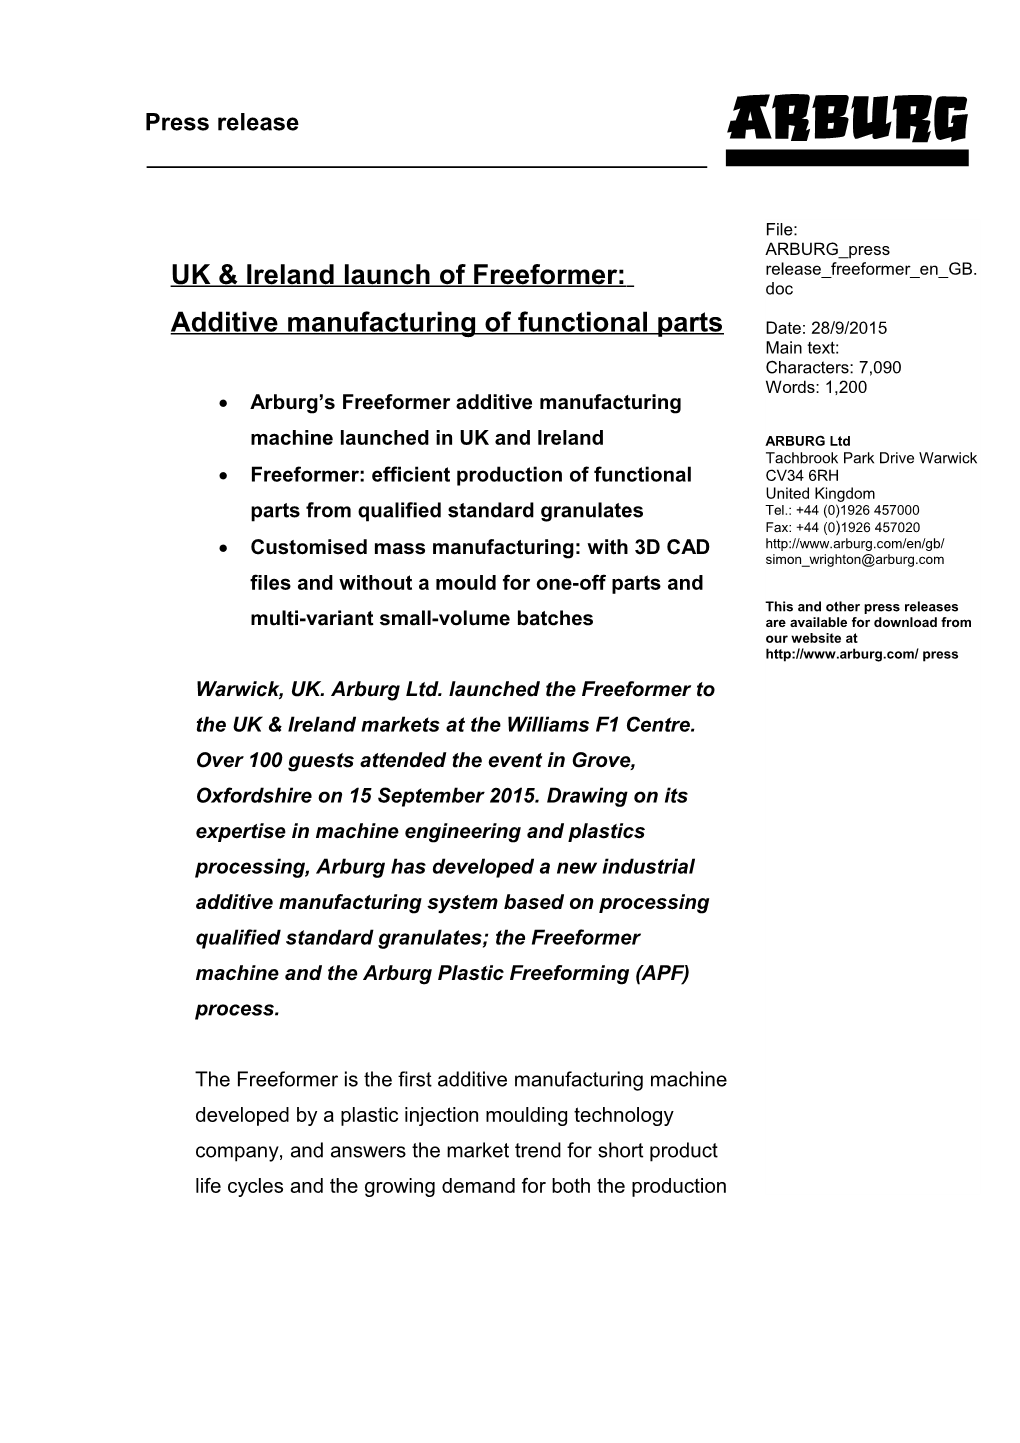 UK & Ireland Launch of Freeformer: Additive Manufacturing of Functional Parts